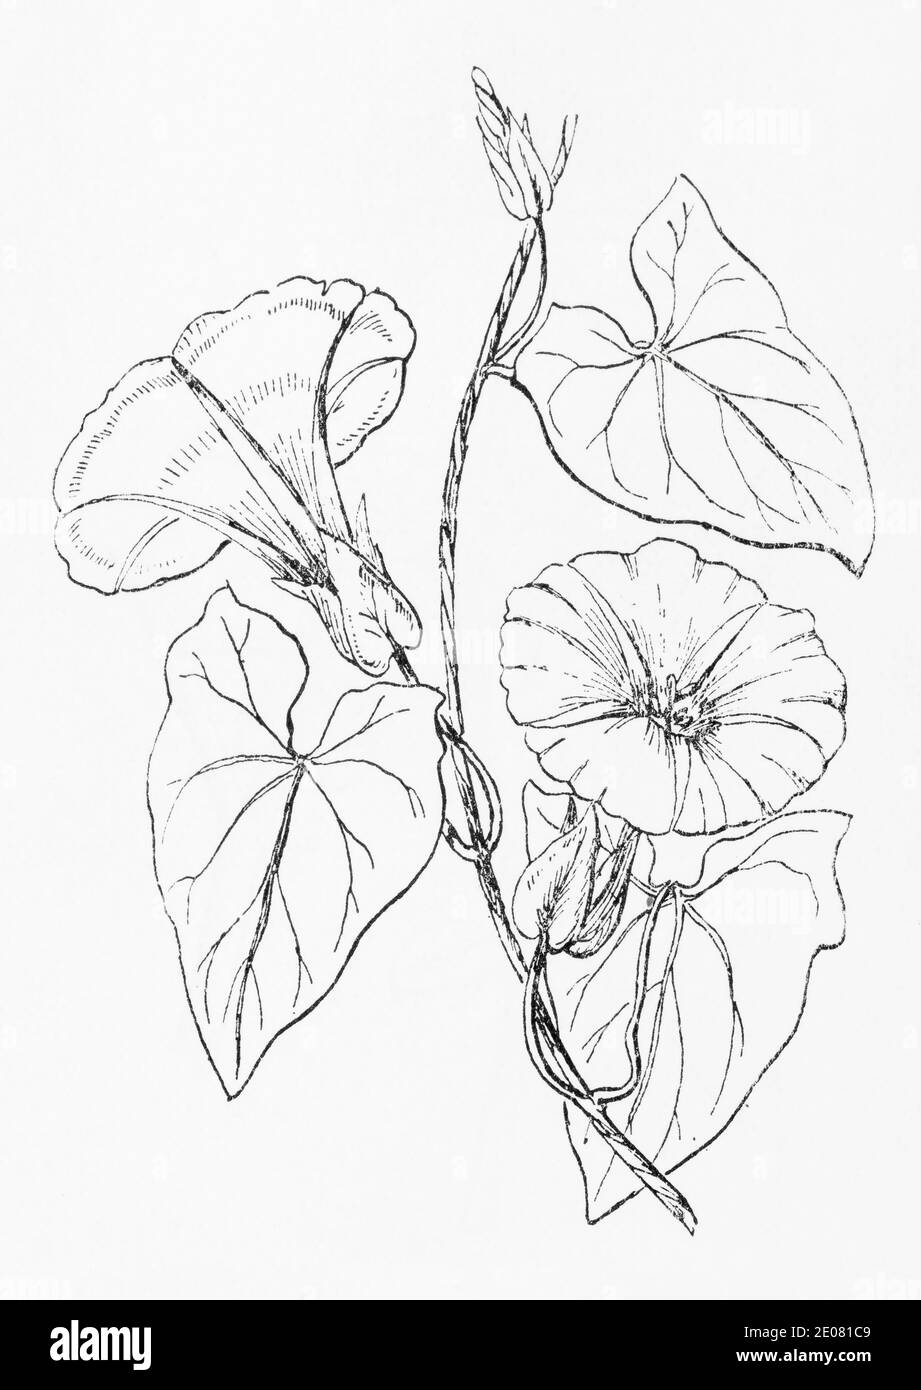 Old botanical illustration engraving of Hedge Bindweed, Convolvulus / Calystegia sepium. Traditional medicinal herbal plant. See Notes Stock Photo